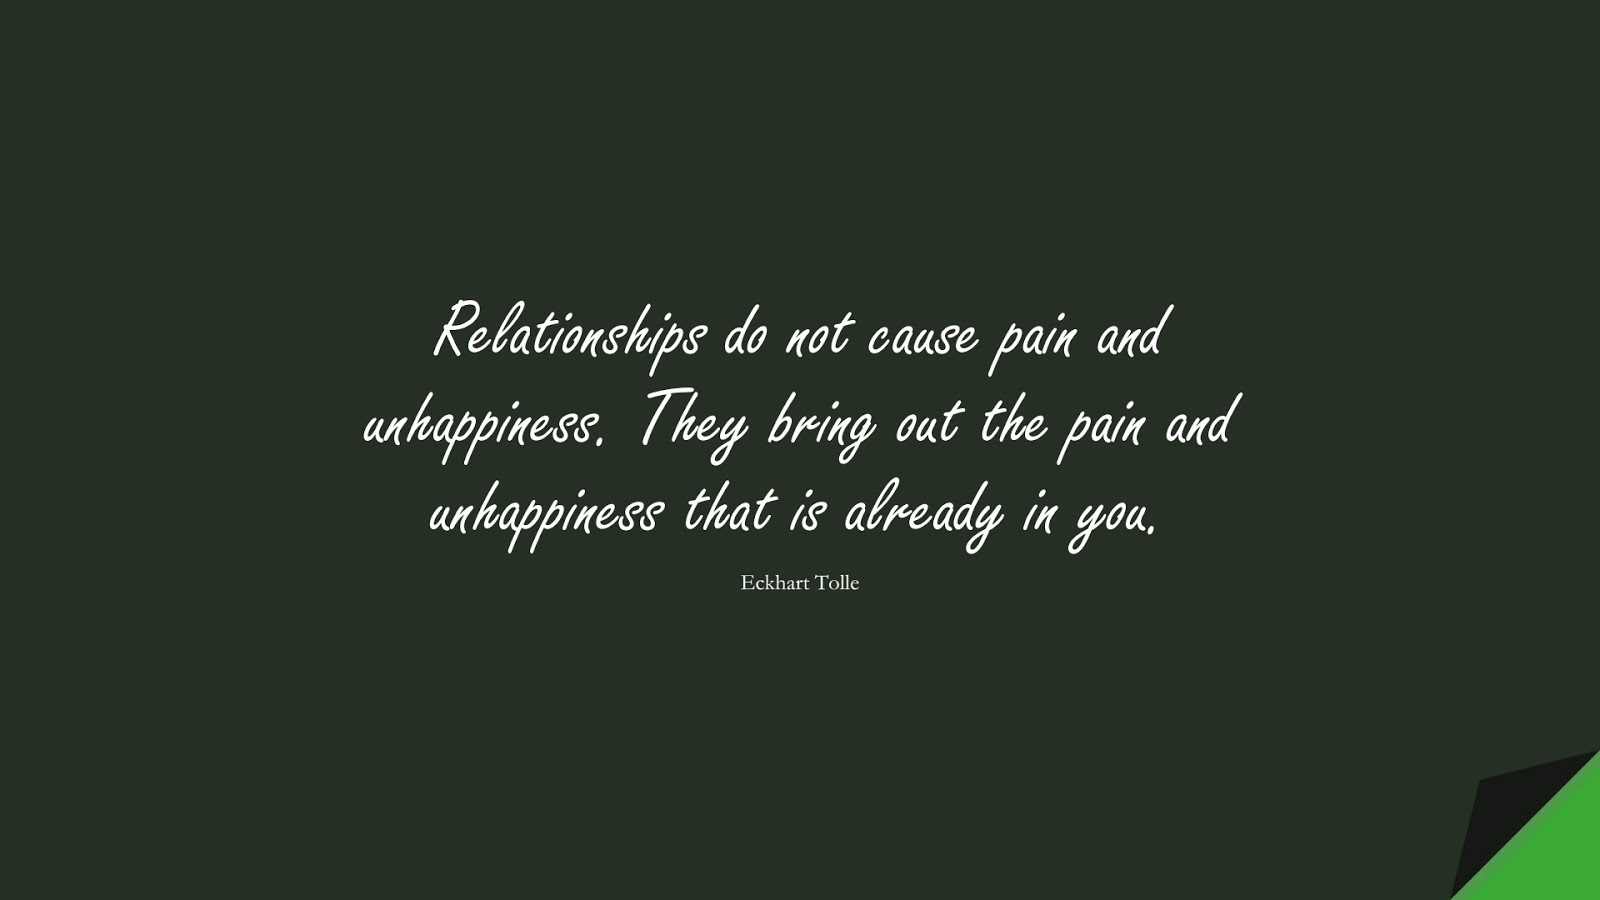 Relationships do not cause pain and unhappiness. They bring out the pain and unhappiness that is already in you. (Eckhart Tolle);  #RelationshipQuotes